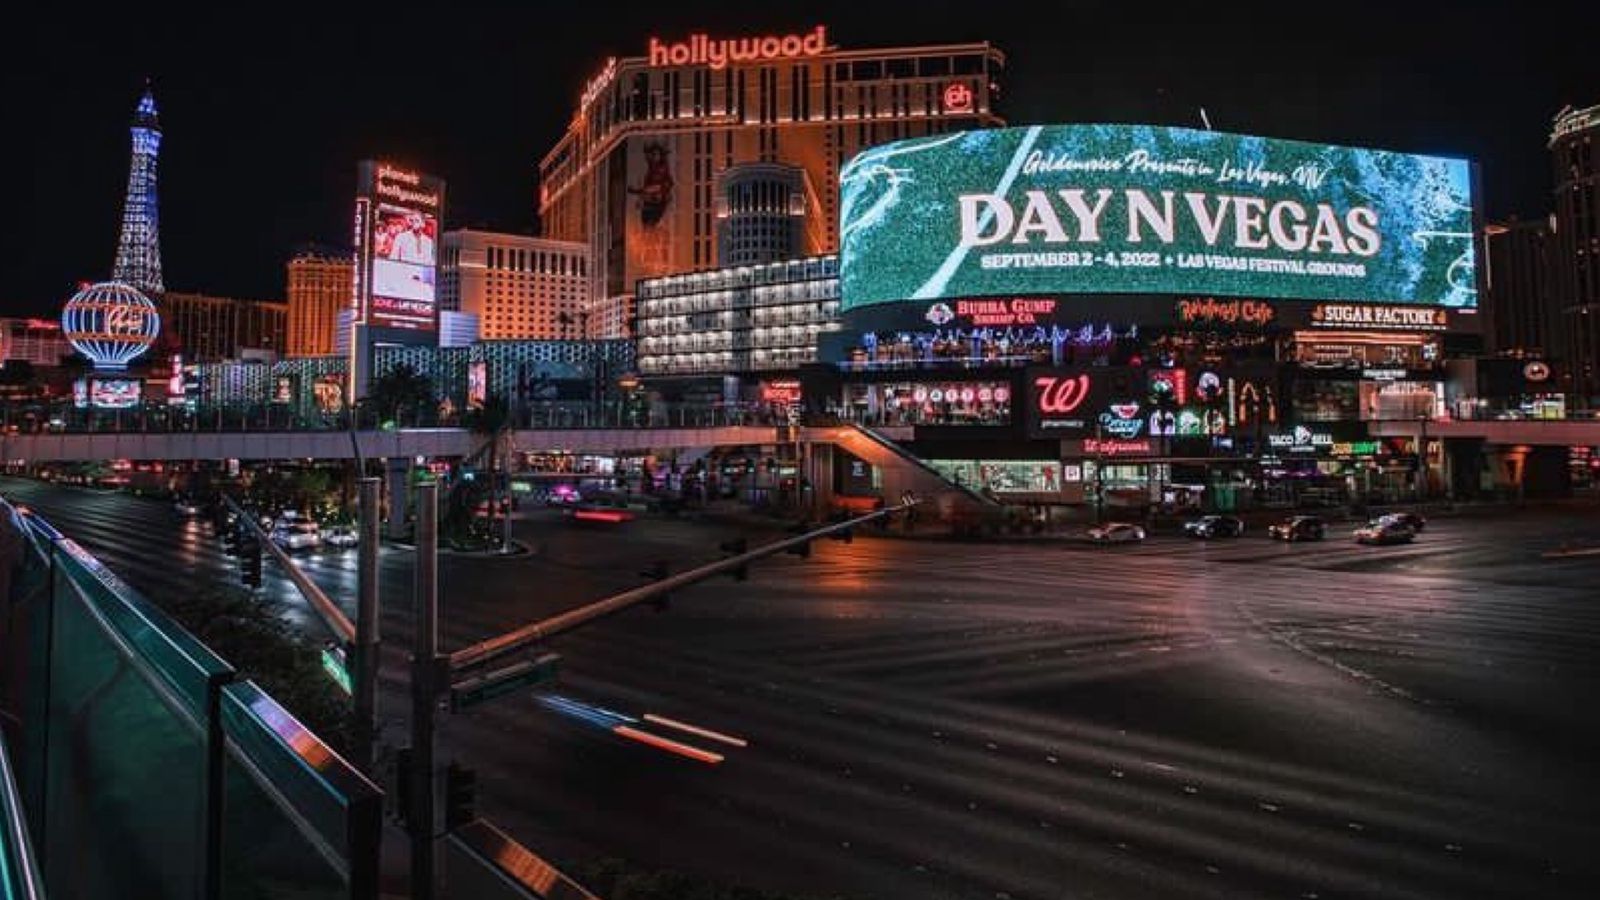 Day N Vegas Festival Canceled Due to 'Combination of Logistics, Timing and Production Issues'